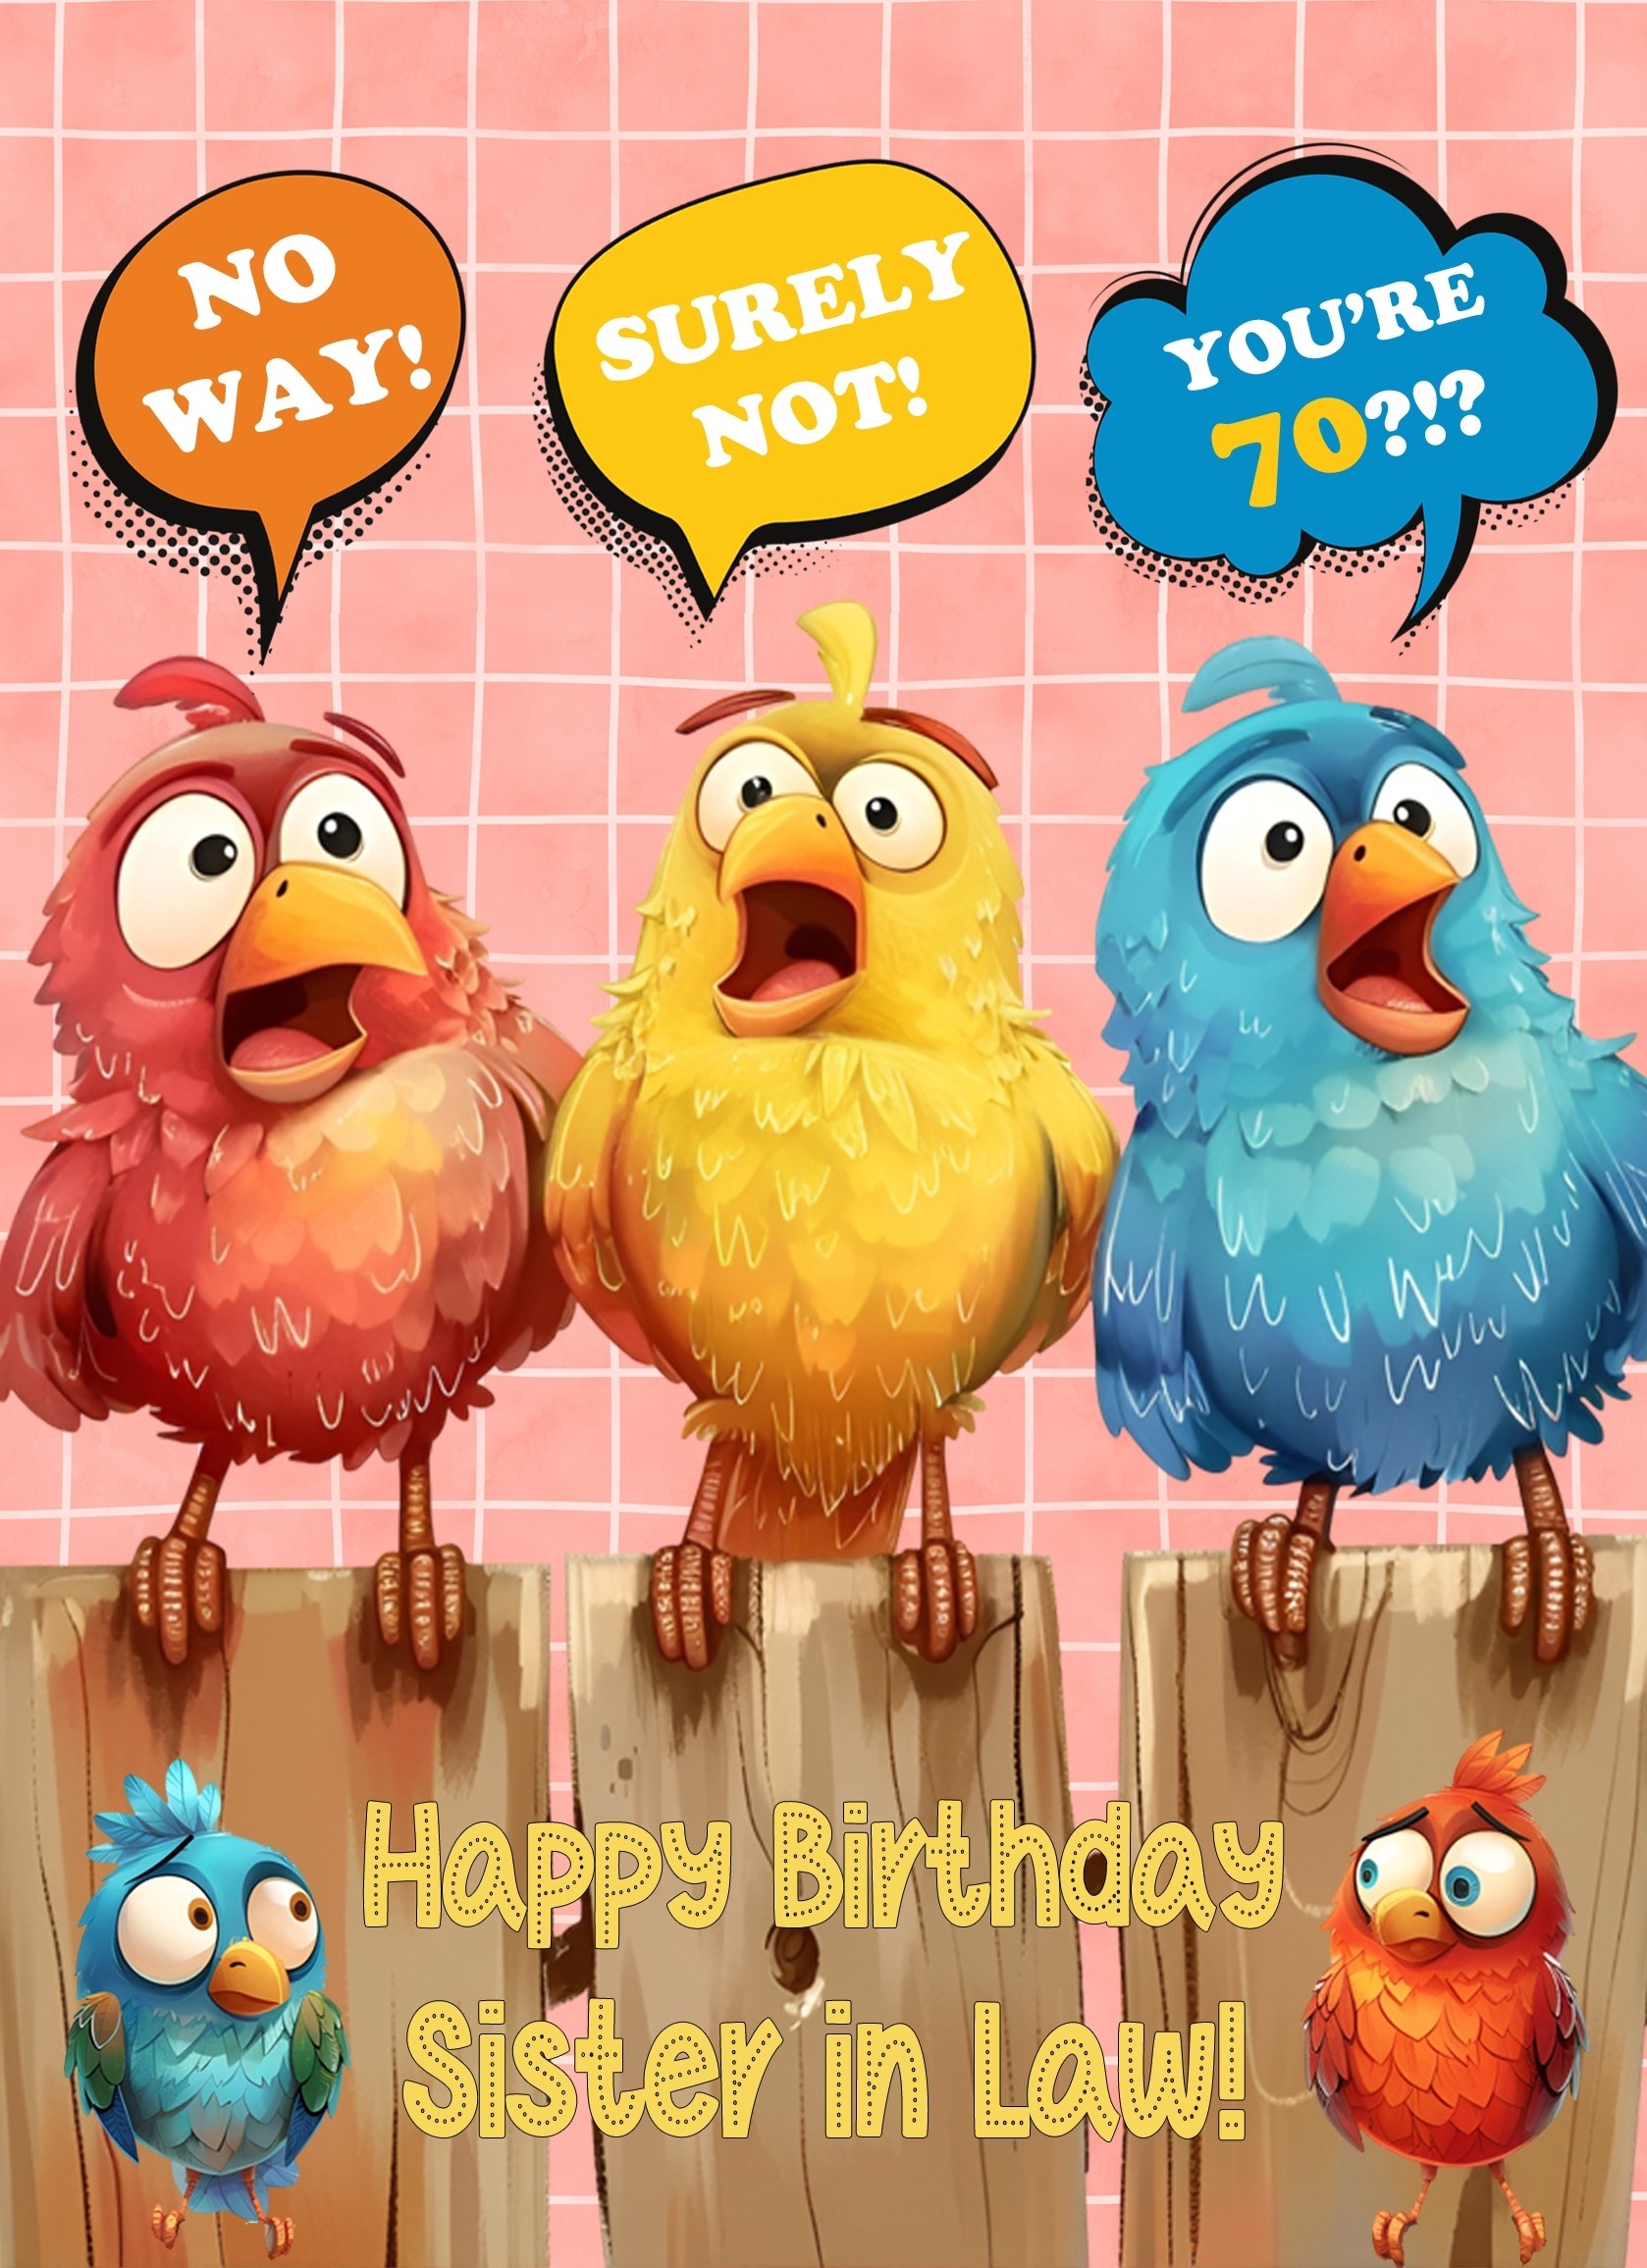 Sister in Law 70th Birthday Card (Funny Birds Surprised)